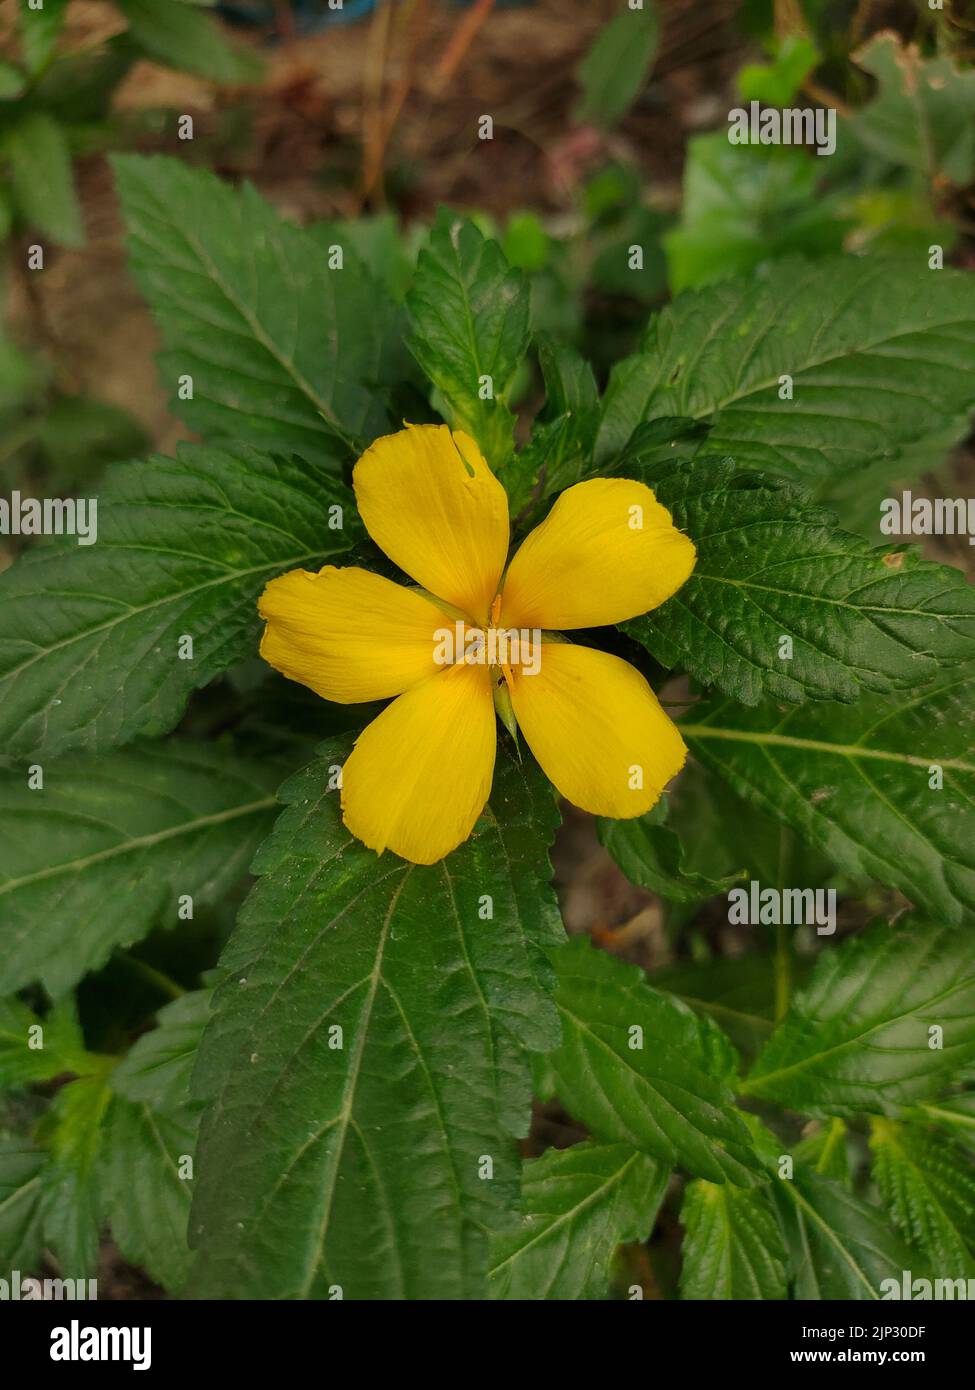 A closeup shot of a damiana flower in the garden in the daylight Stock Photo